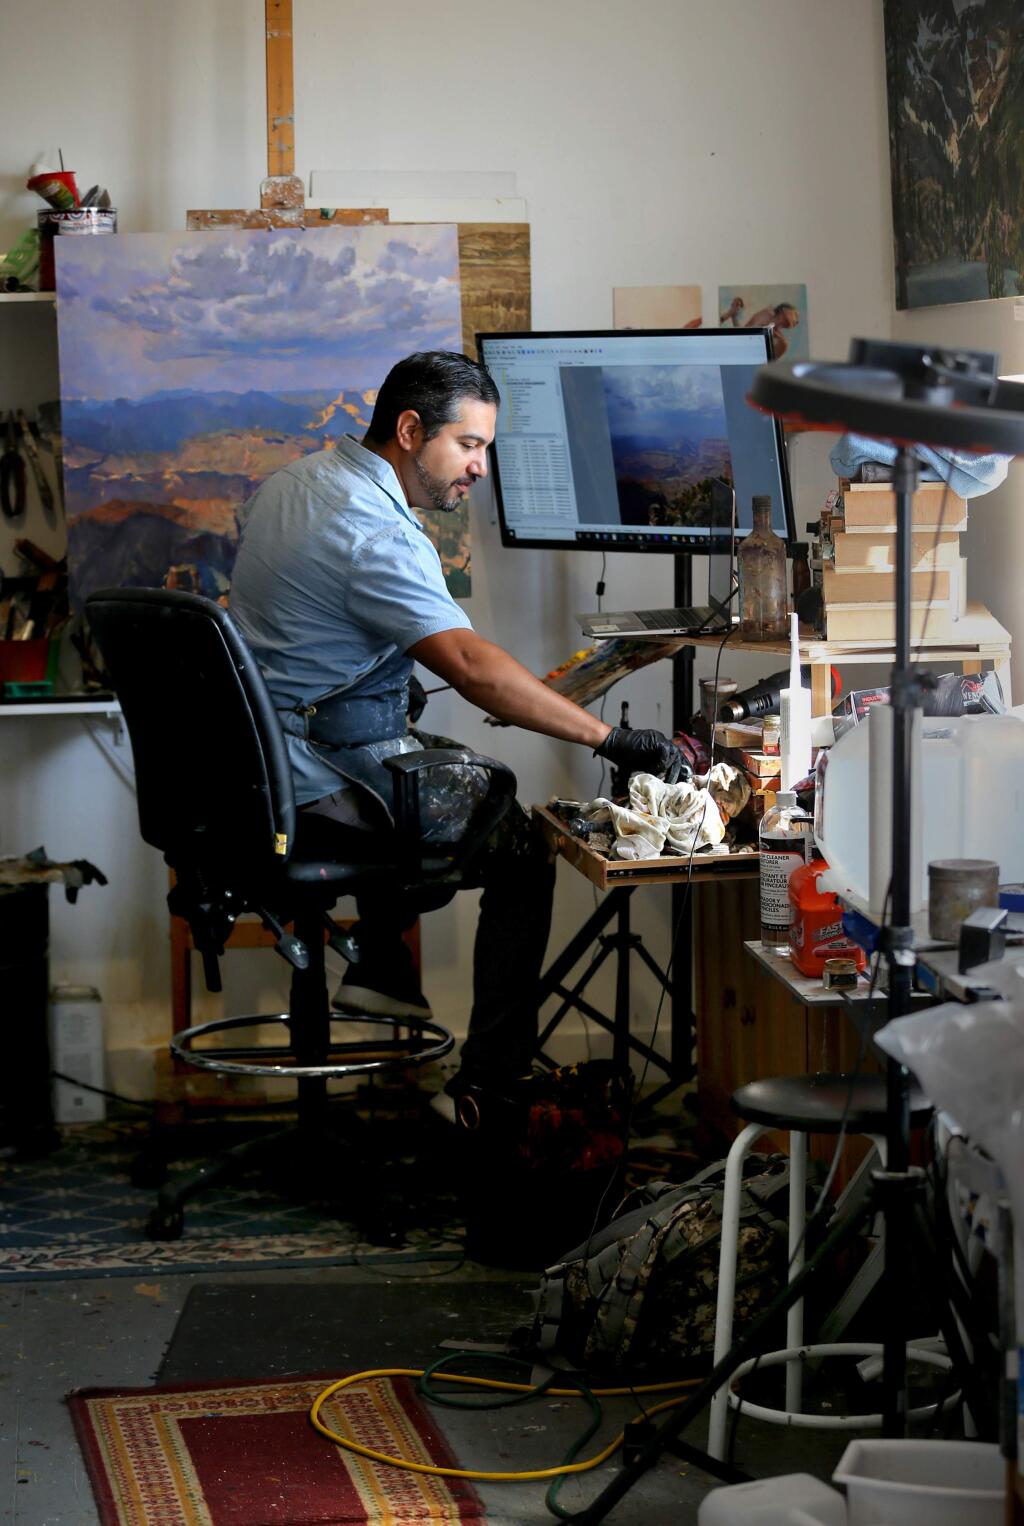 Sergio Lopez works on a painting of the Grand Canyon in his studio in Santa Rosa on Thursday, Aug. 29, 2019. (BETH SCHLANKER/ The Press Democrat)